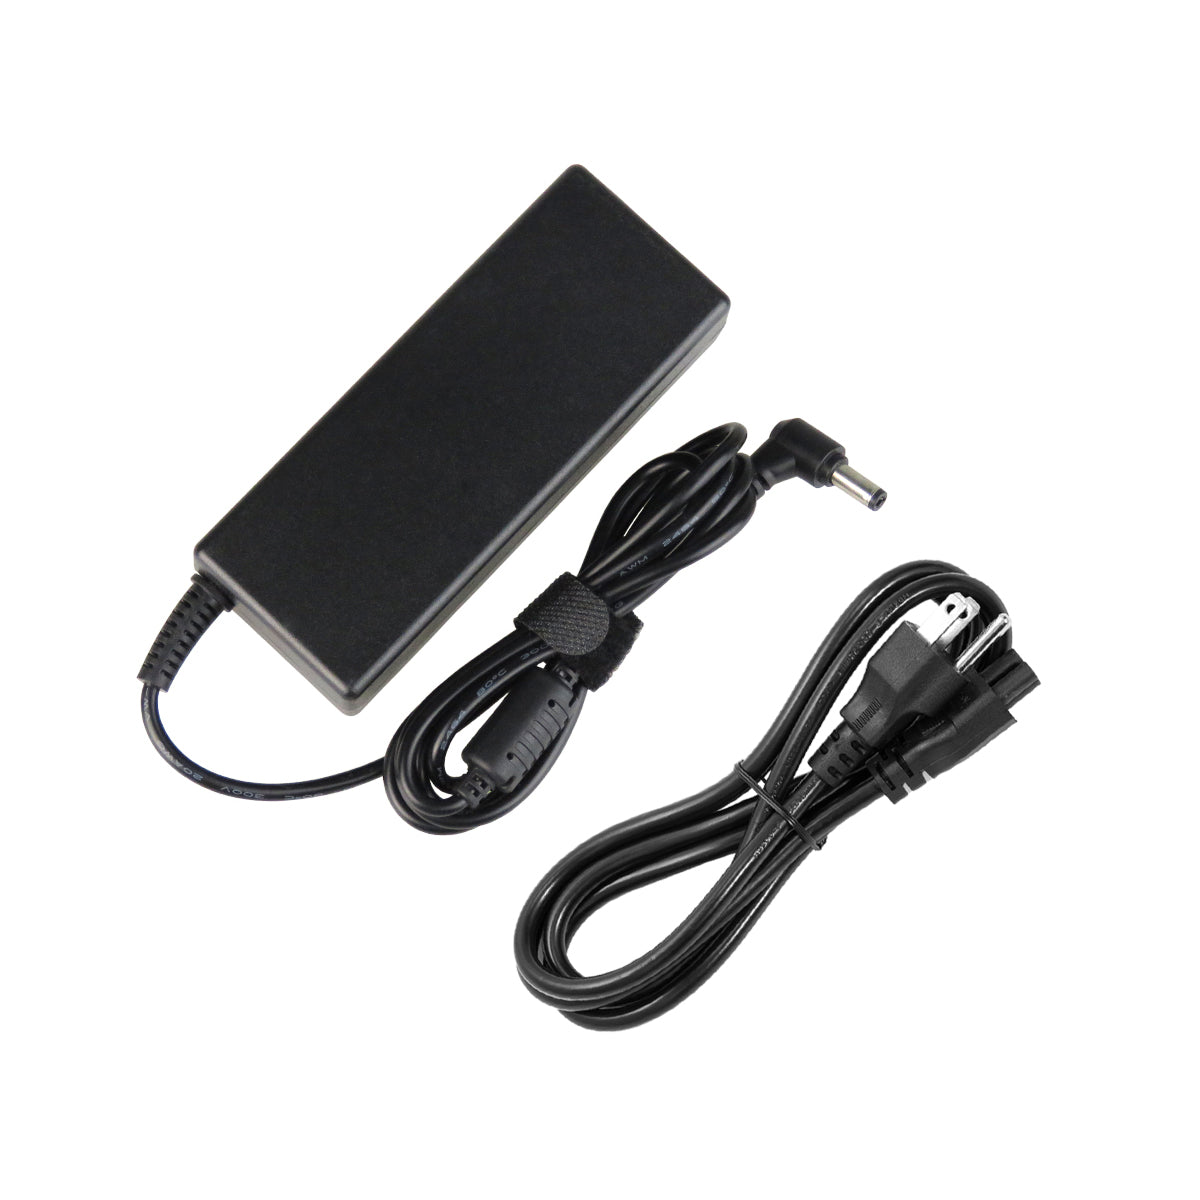 AC Adapter Charger for ASUS X64JV Notebook.